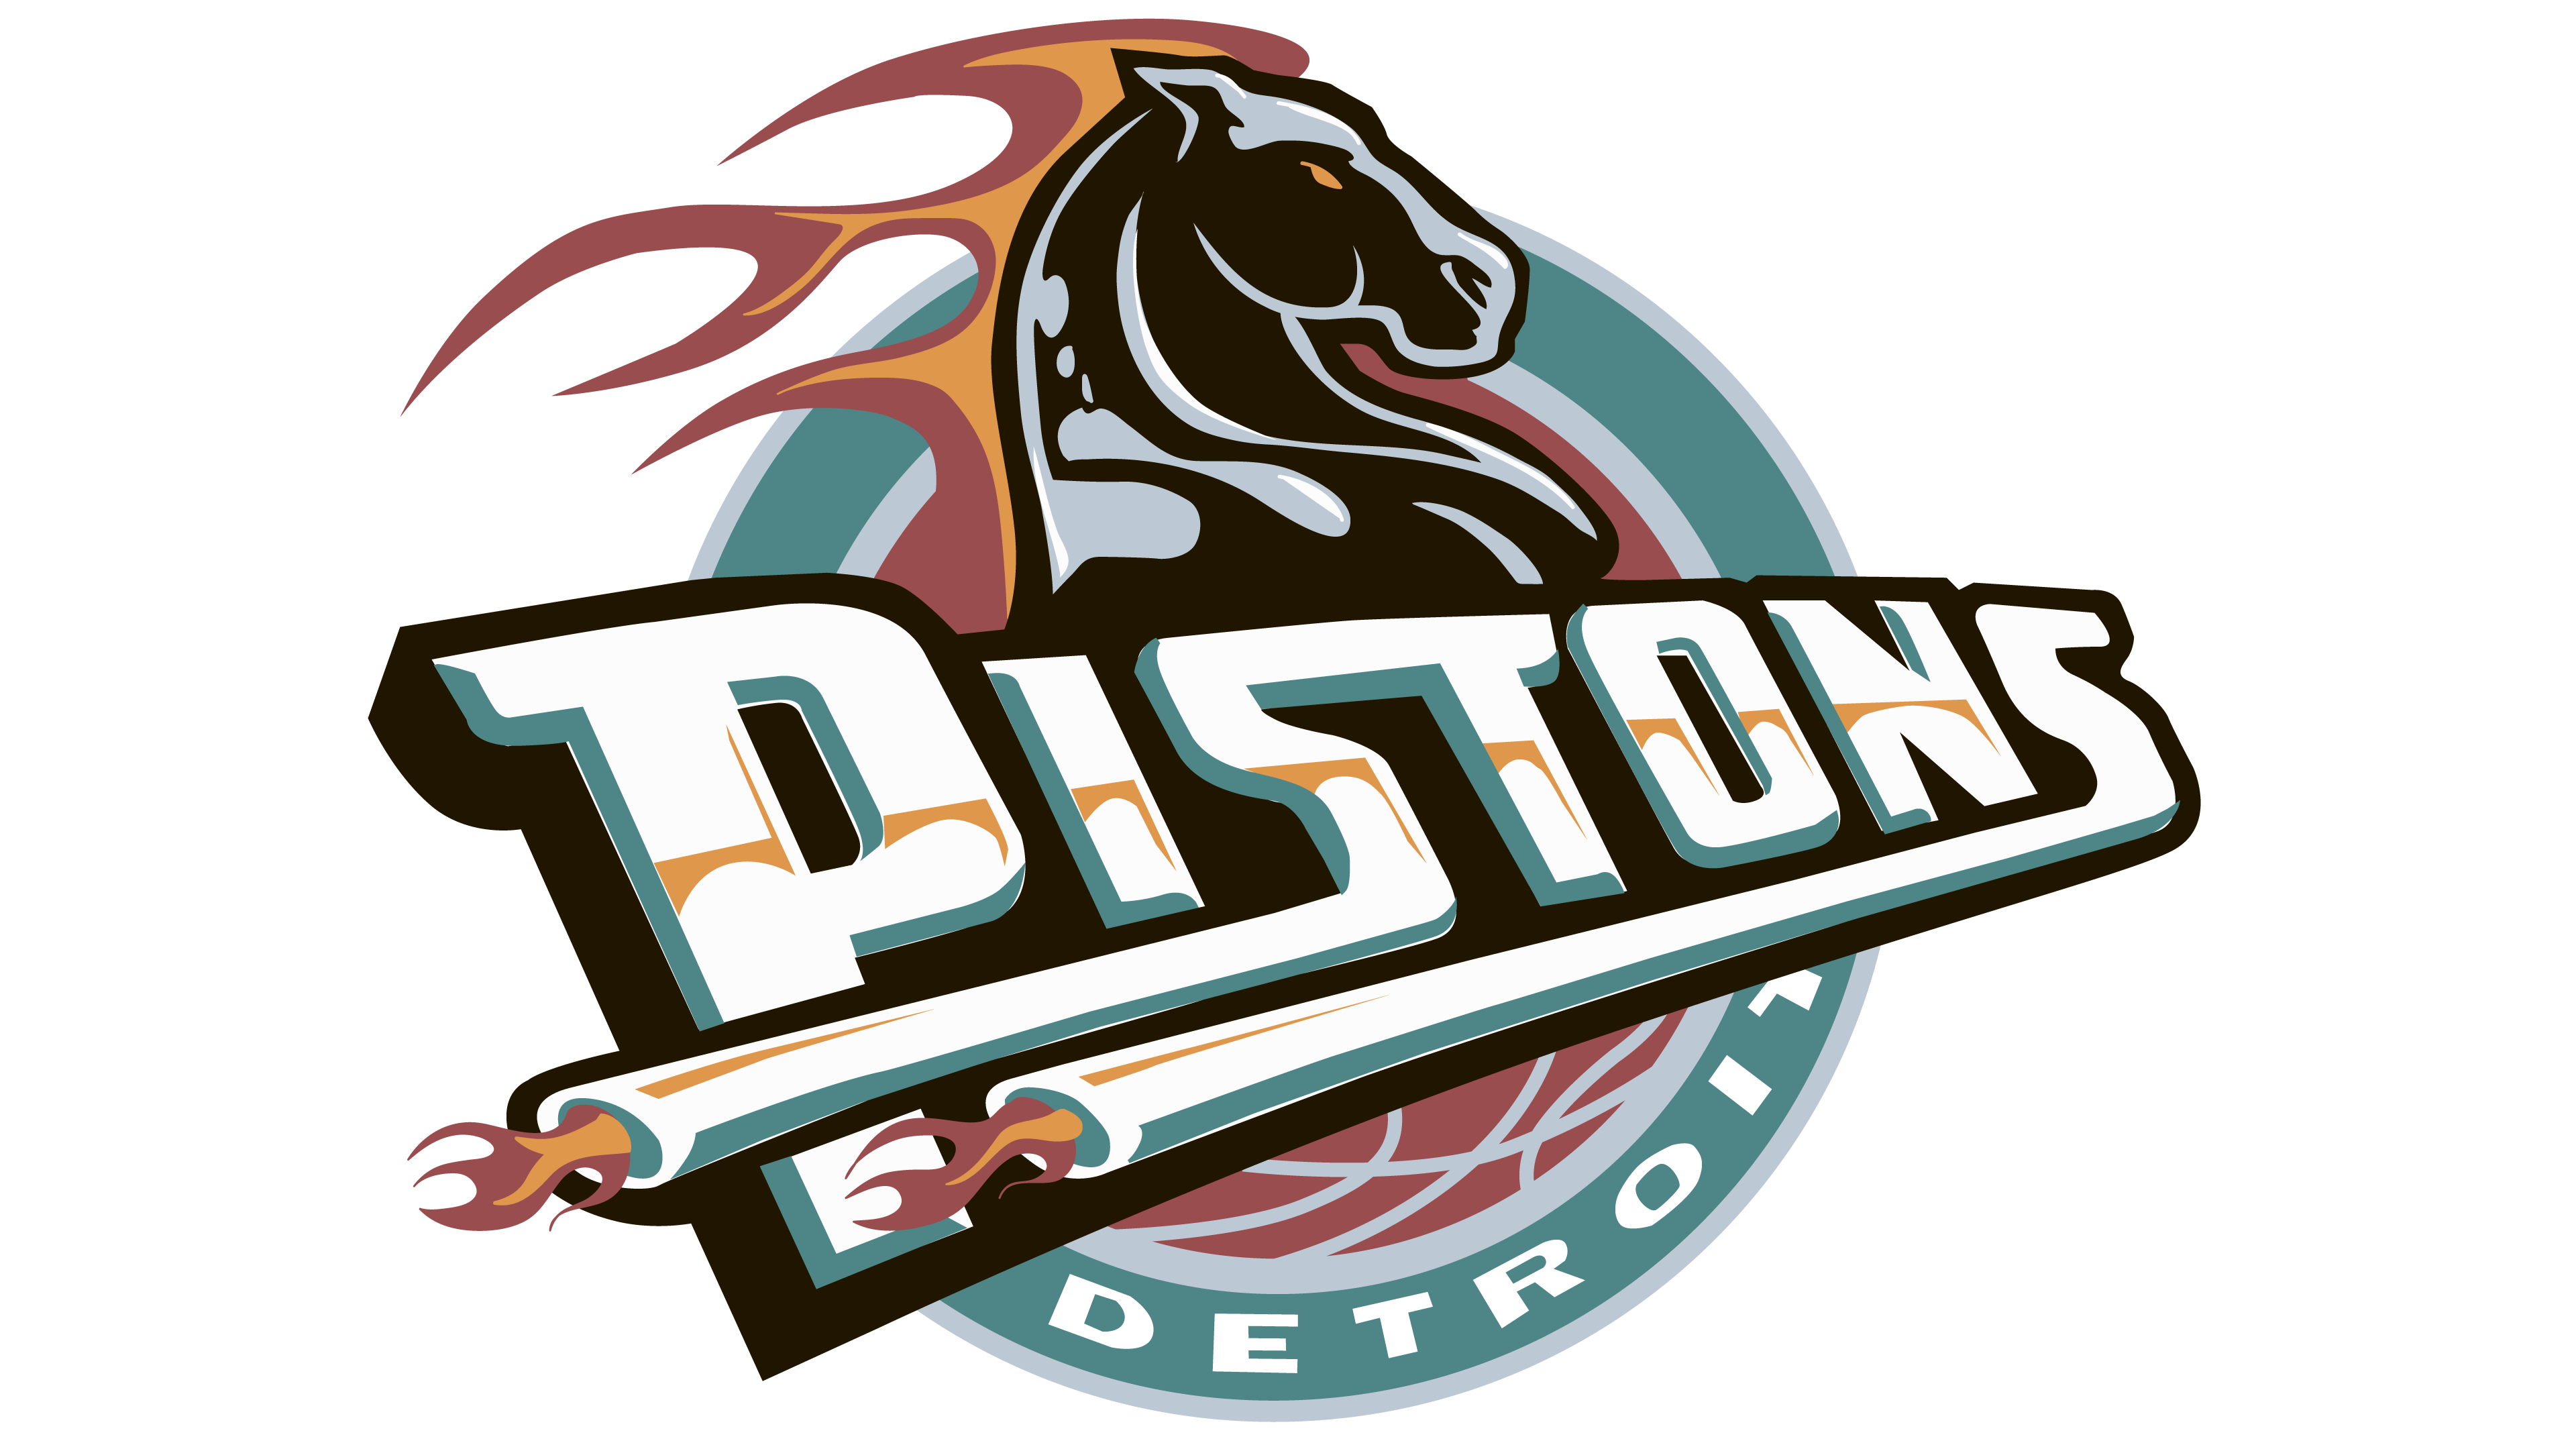 Detroit Pistons Logo - Detroit Pistons logo - Interesting History of the Team Name and emblem